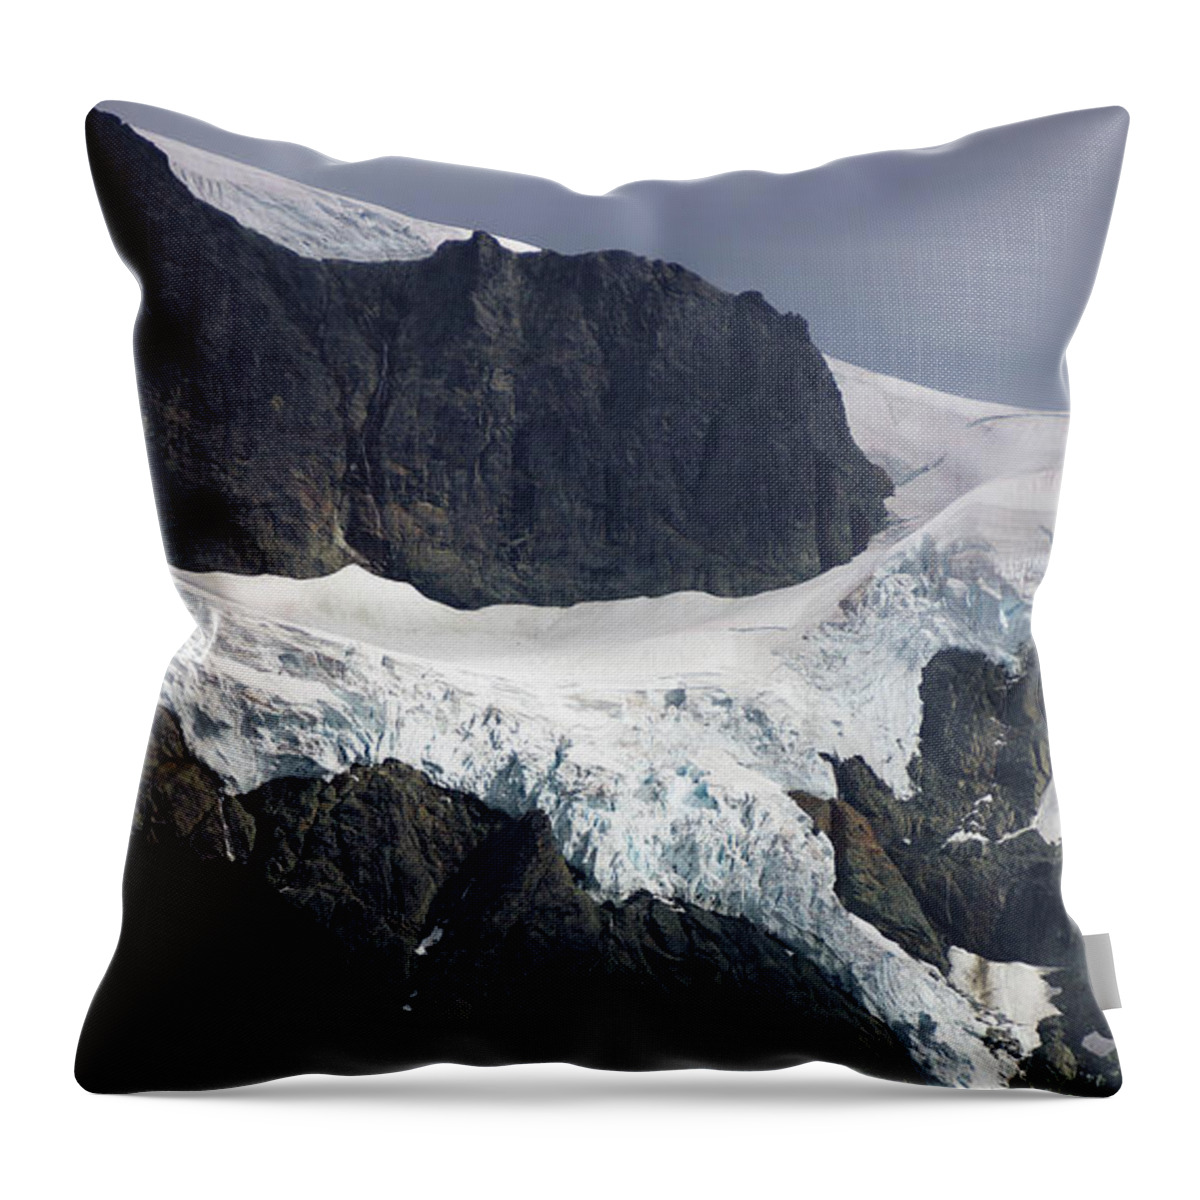 Mount Throw Pillow featuring the photograph Winter Peaks by Sean Henderson